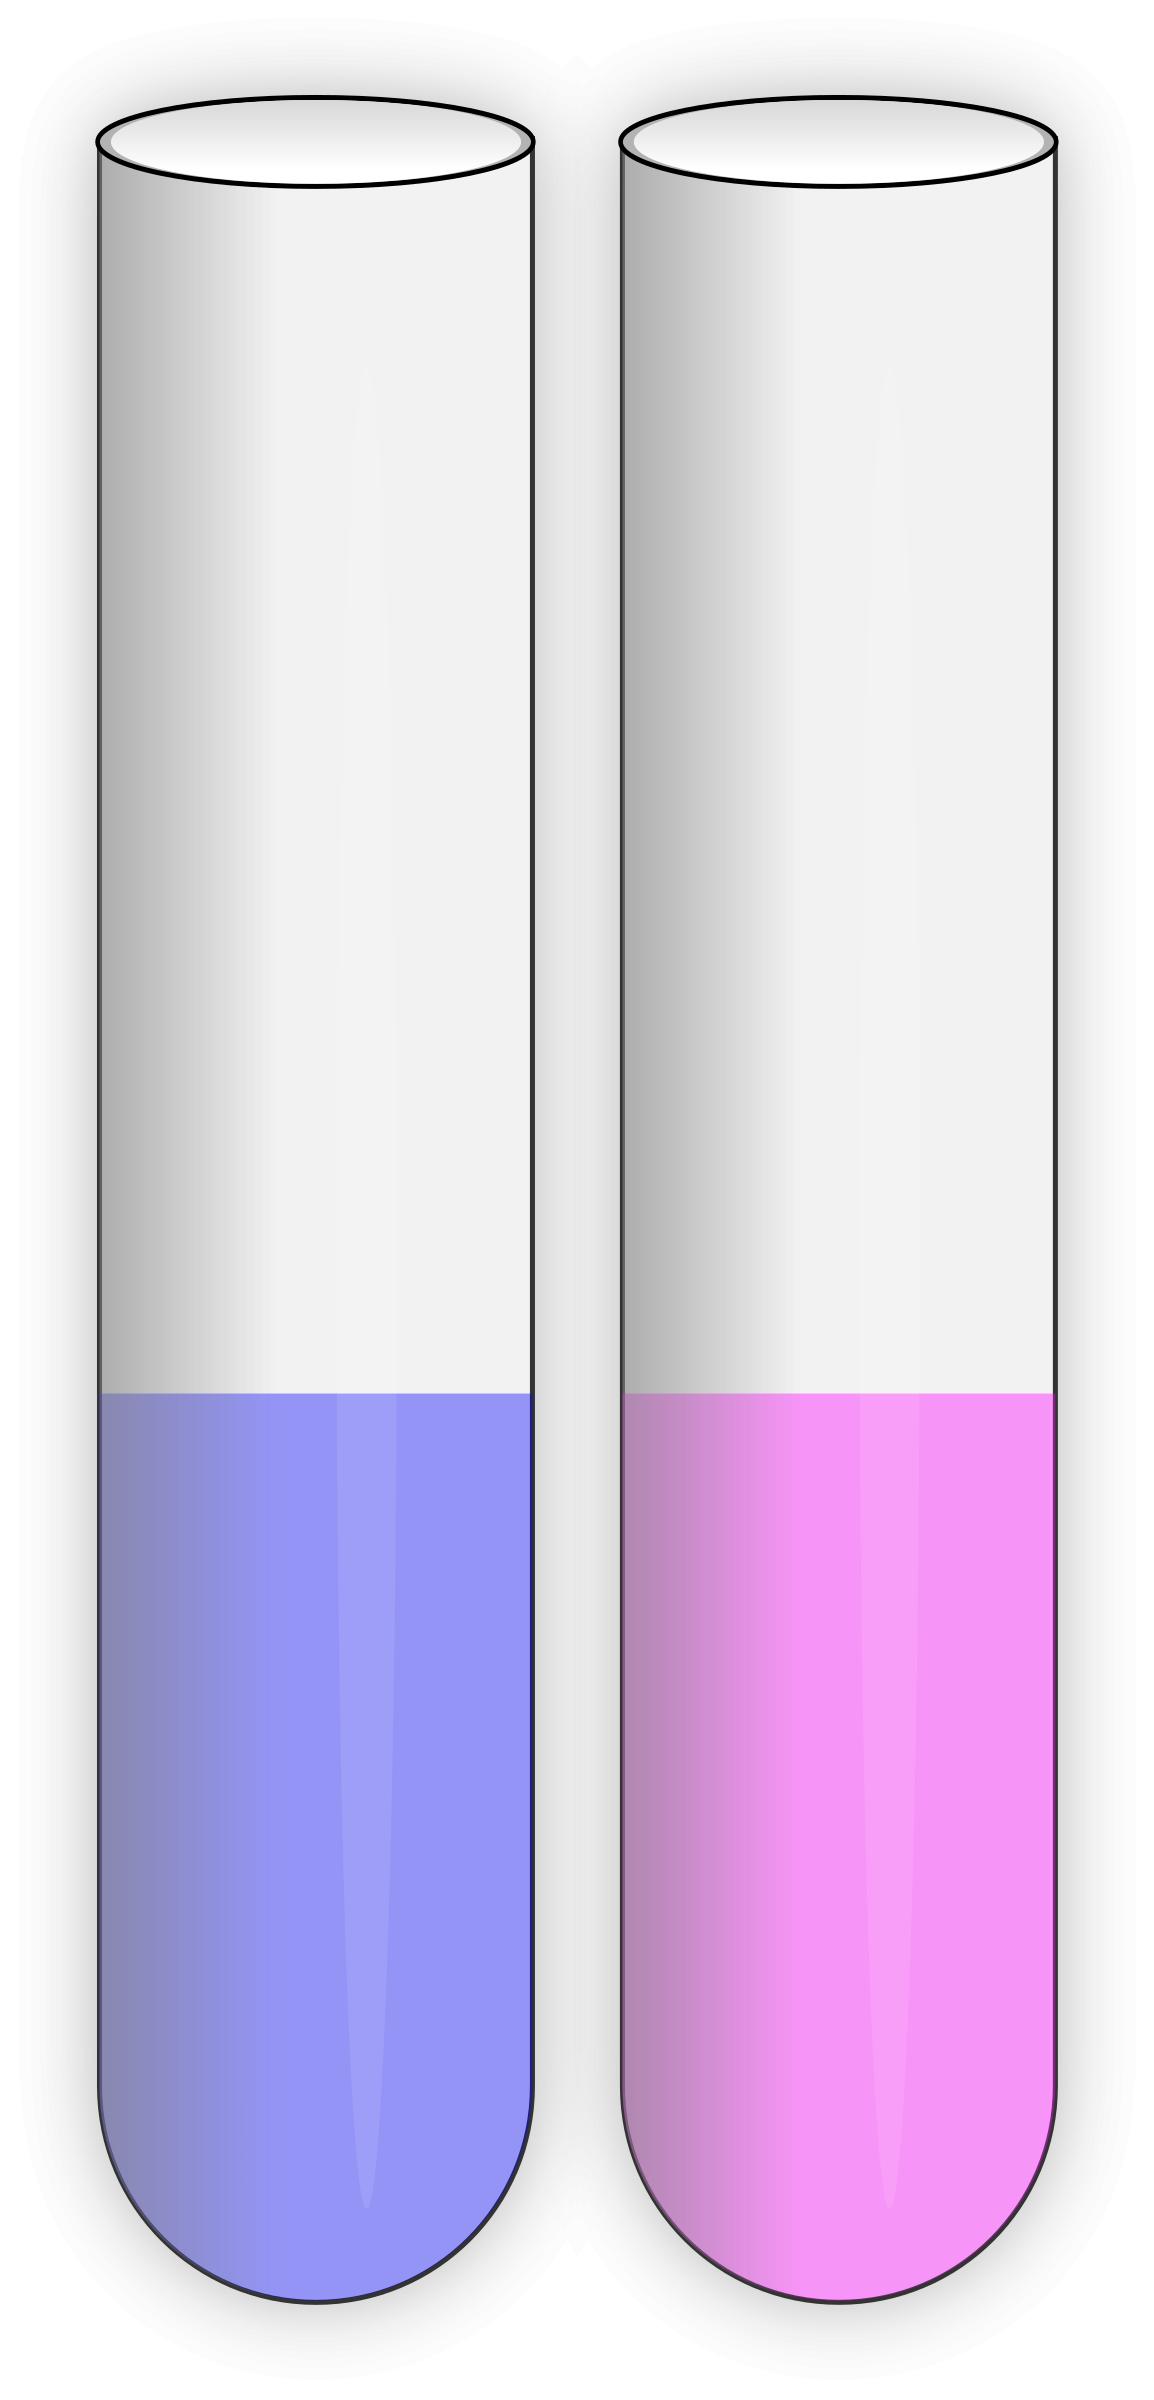 Test Tubes (Open) png